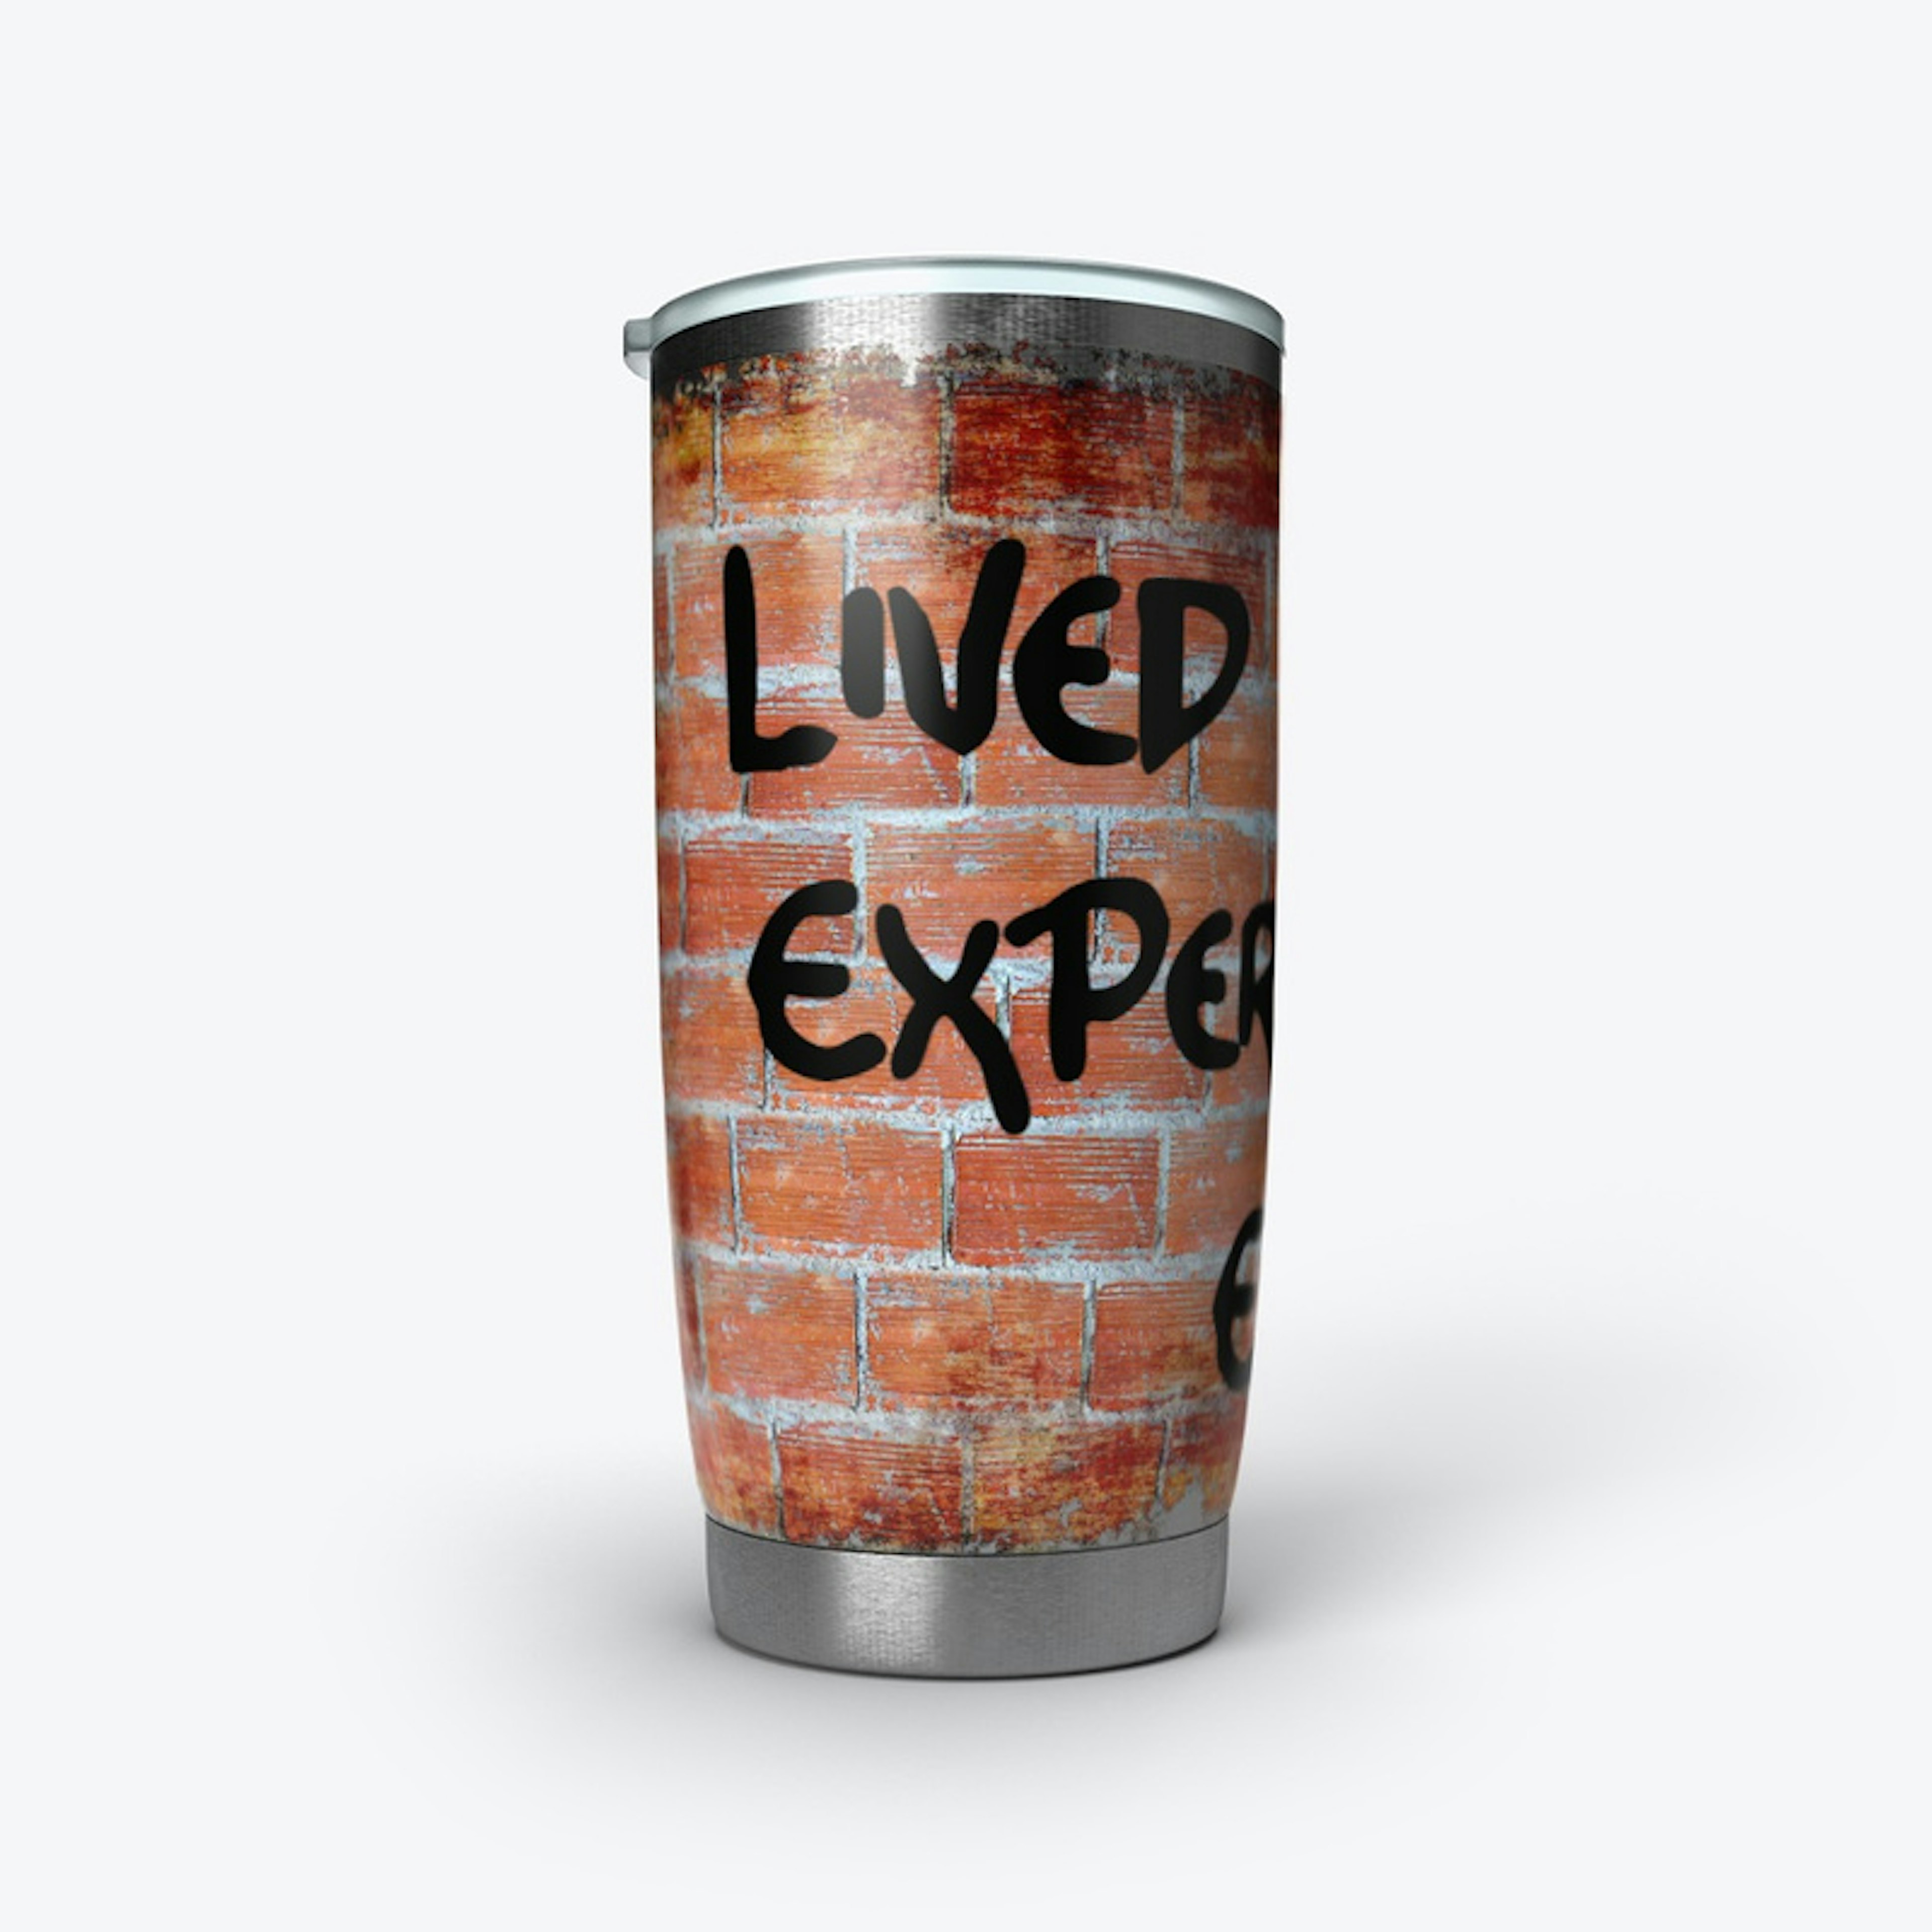 Lived Experience Expert